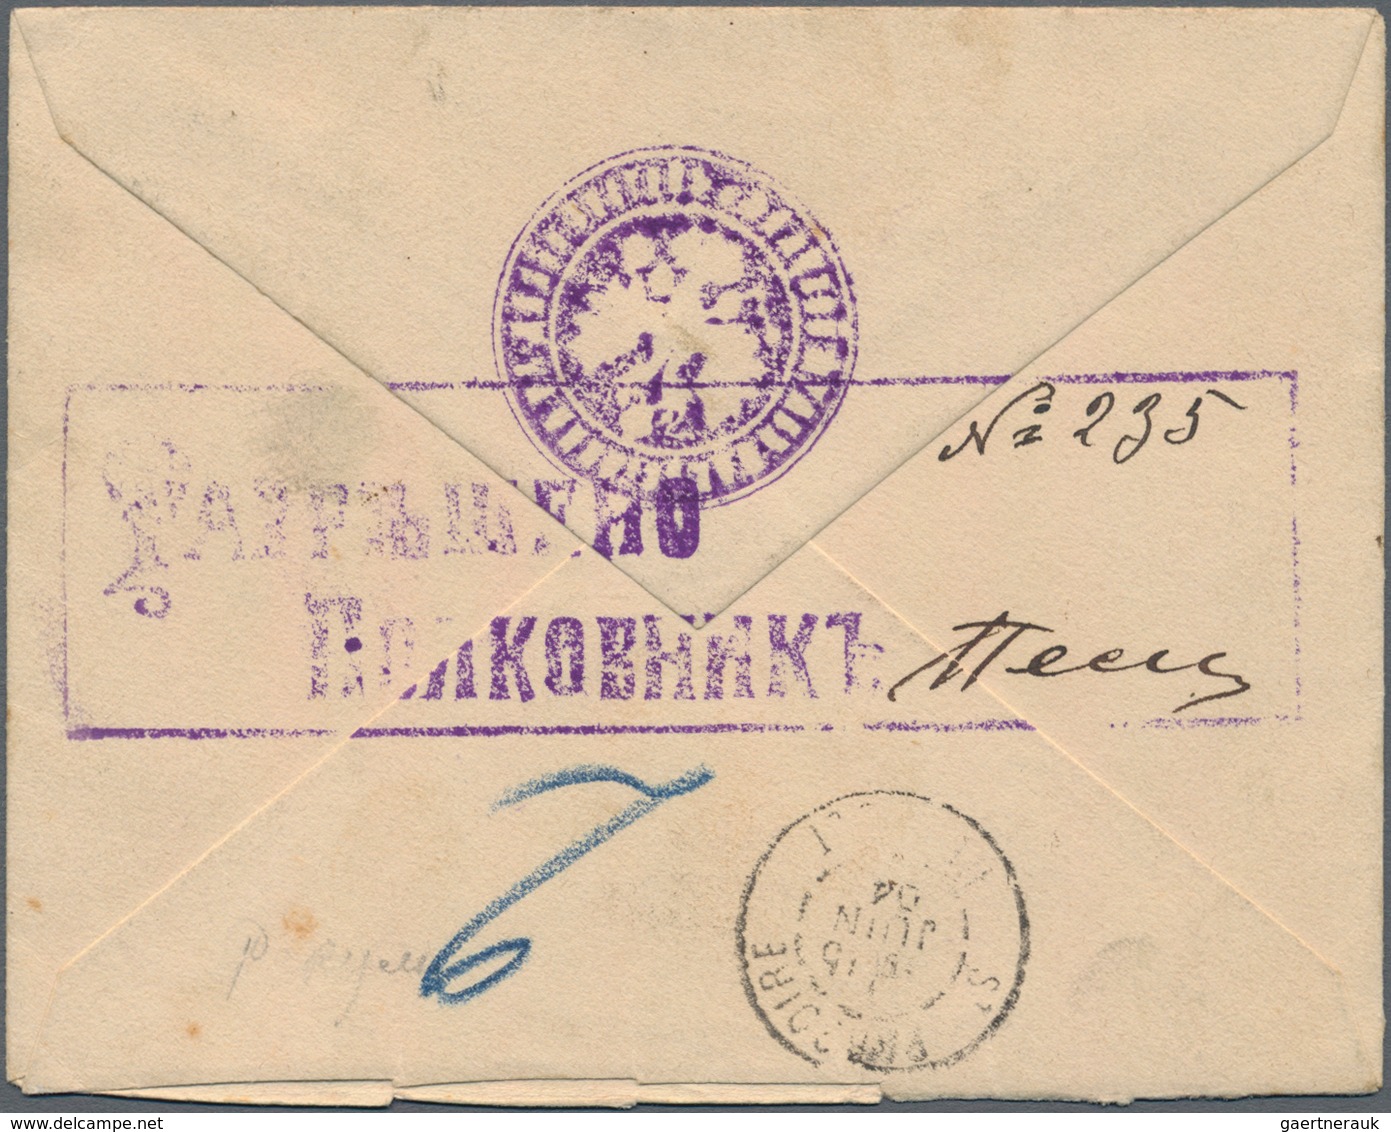 Russische Post In China: 19.05.1904 Russo-Japanese War Registered Cover Franked With Pair Of 10 Kop. - China